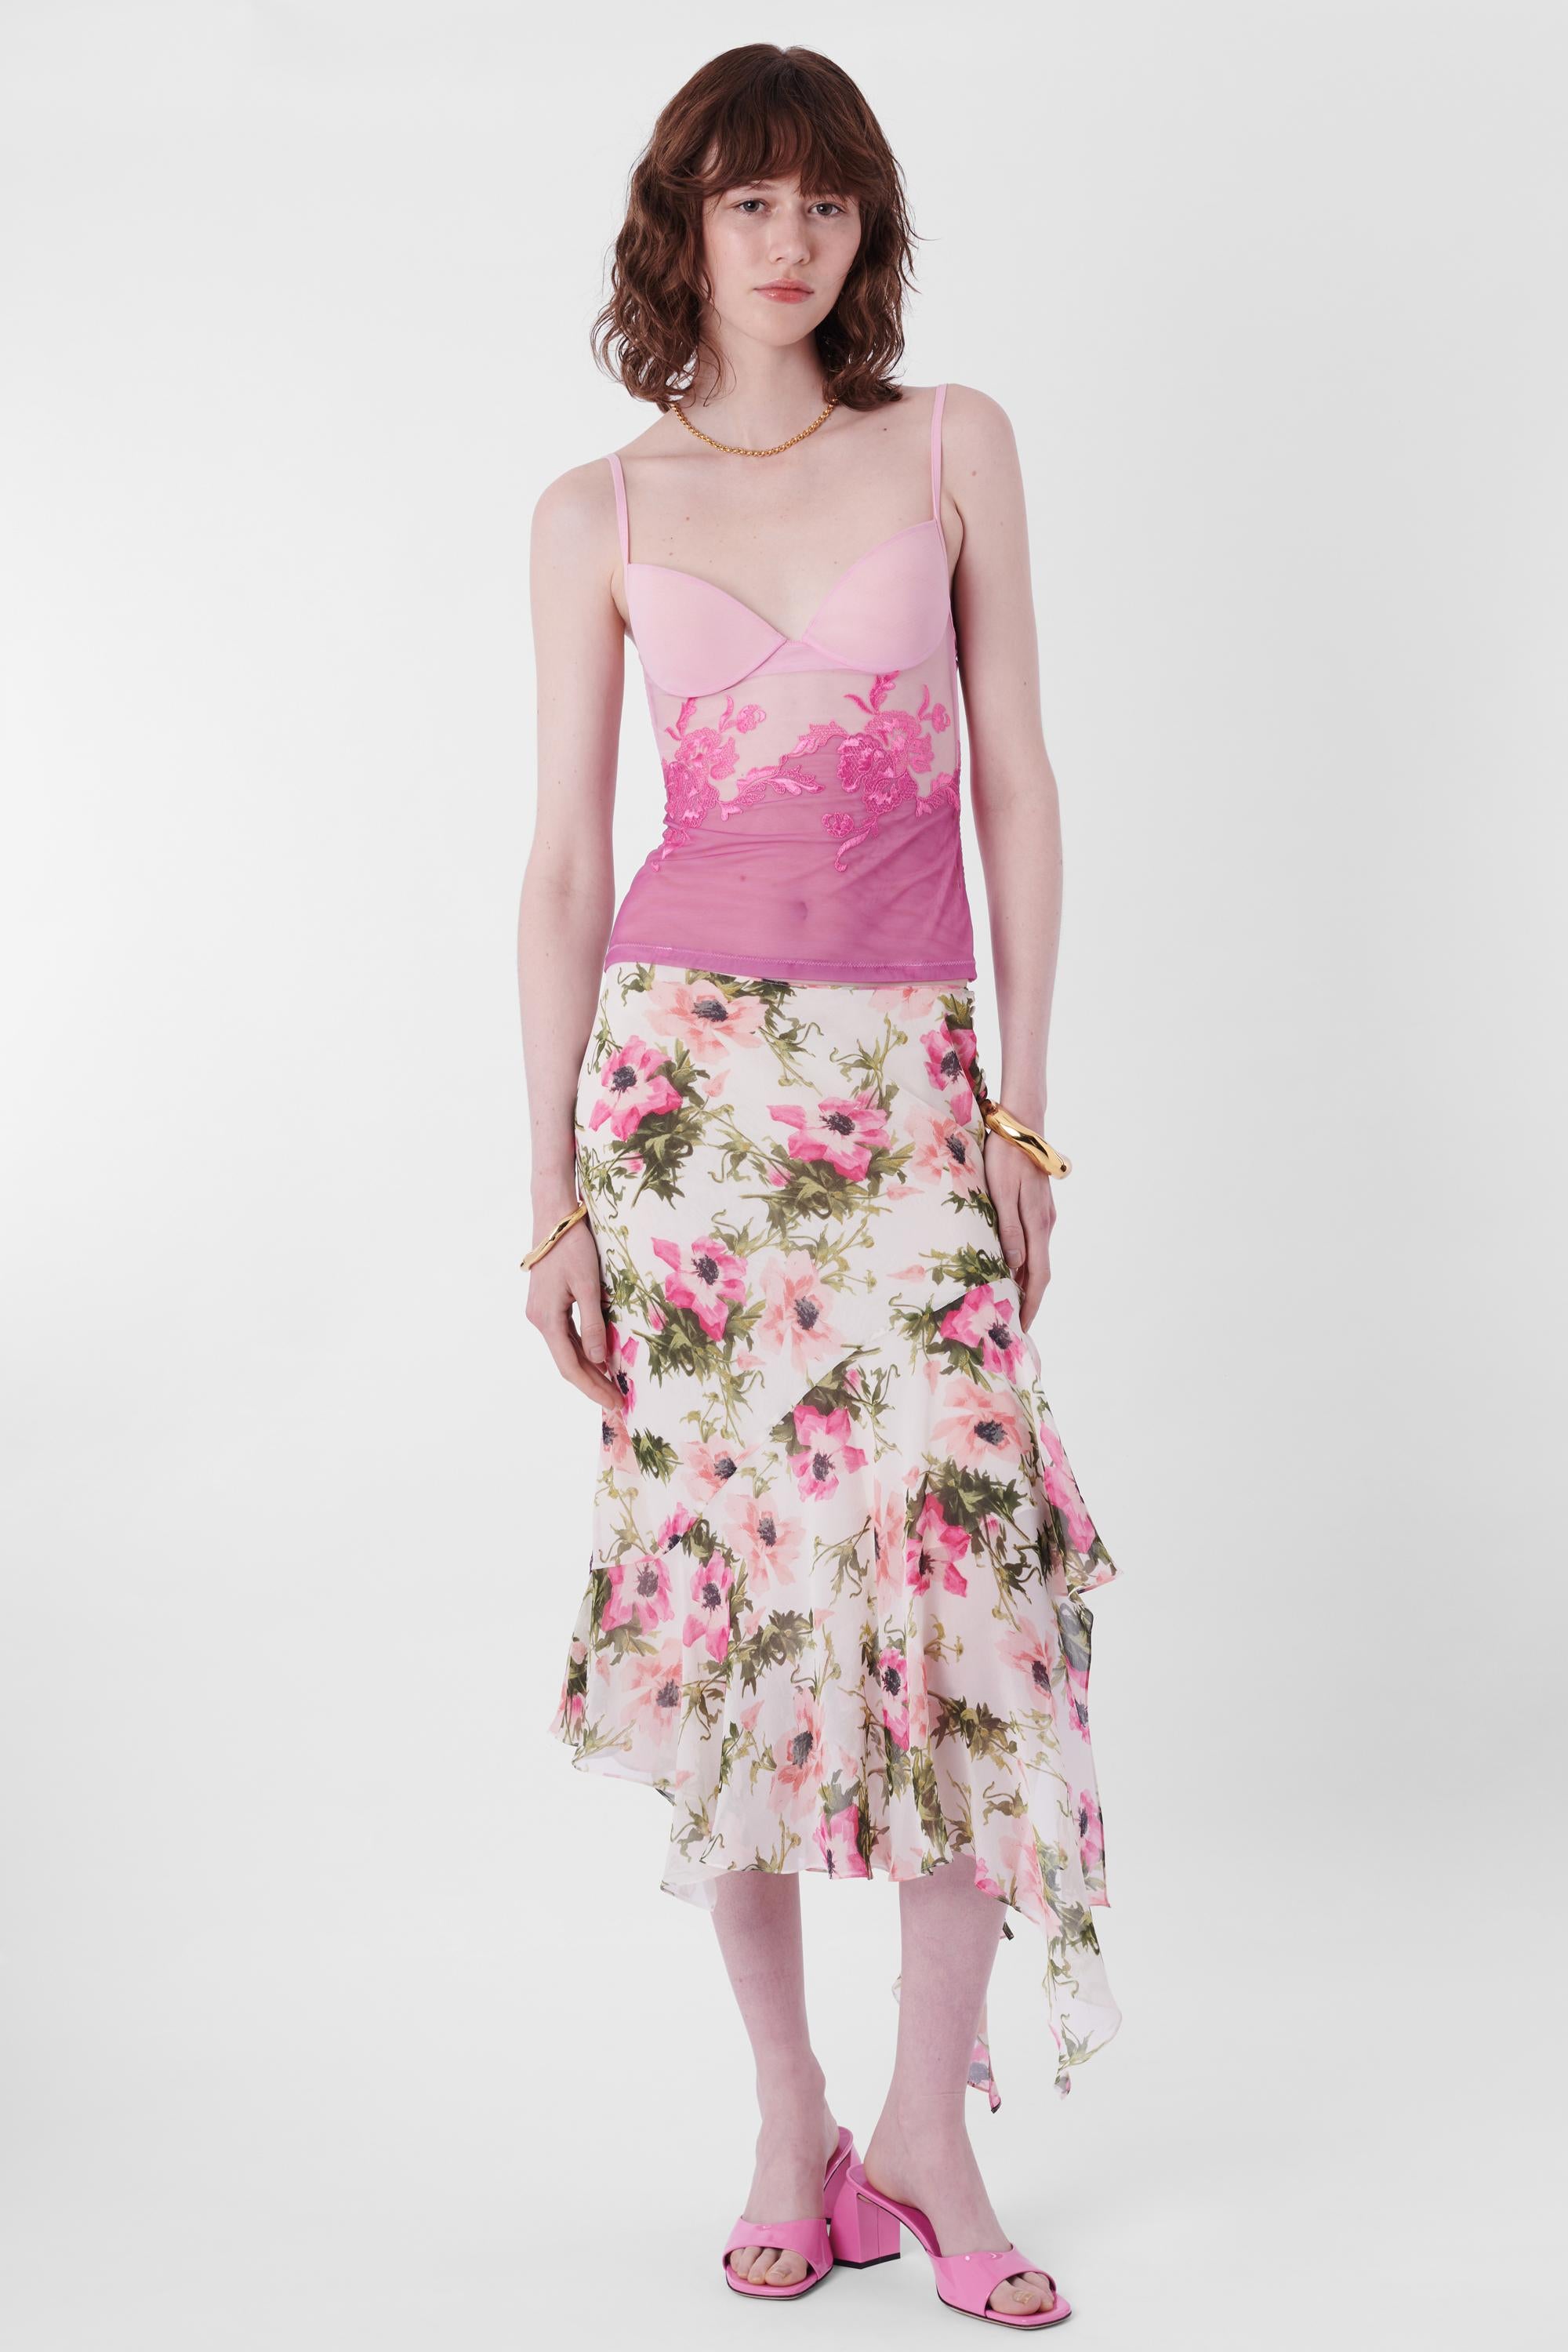 We are excited to present this incredible John Galliano S/S 2005 Floral Silk Midi Skirt. Features bias cut with ruffles down side and hem with coated buttons down side. Authenticity guaranteed.

Size: UK 10
Label size: UK 12
Modern size: UK:8- 10,